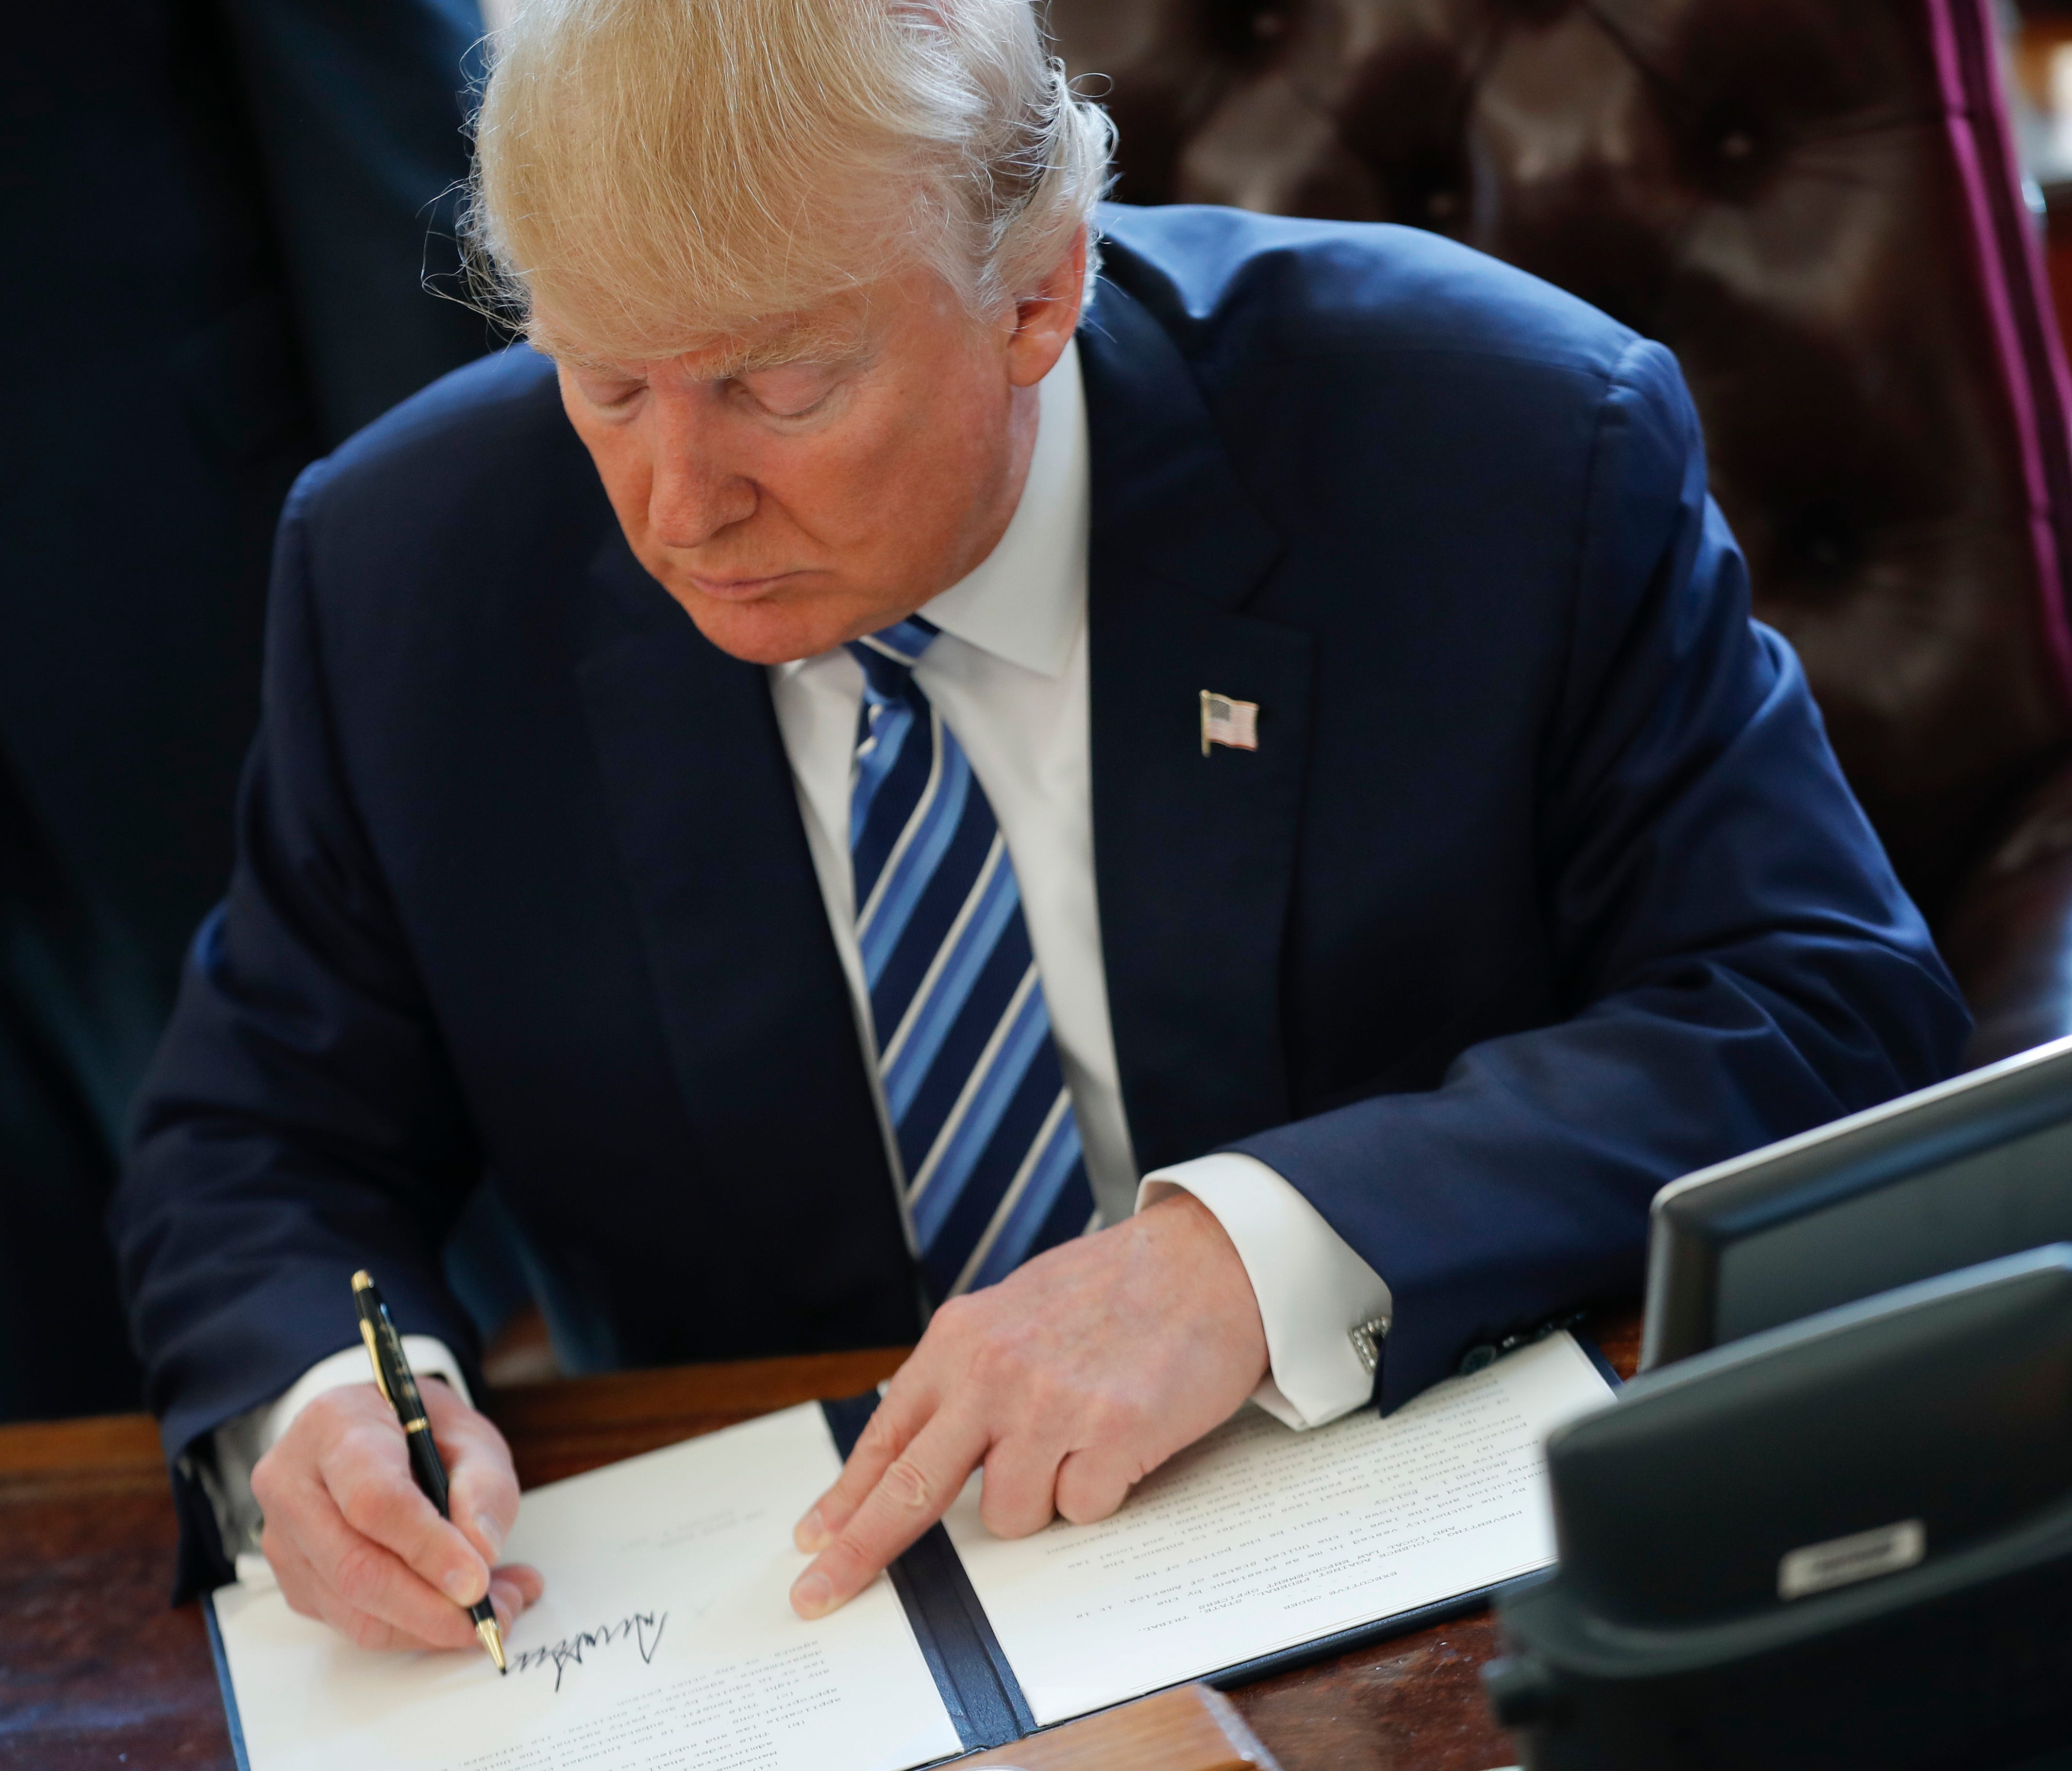 President Trump signs an executive order in the Oval Office on Feb. 9, 2017. Trump signed three executive orders related to reducing crime.